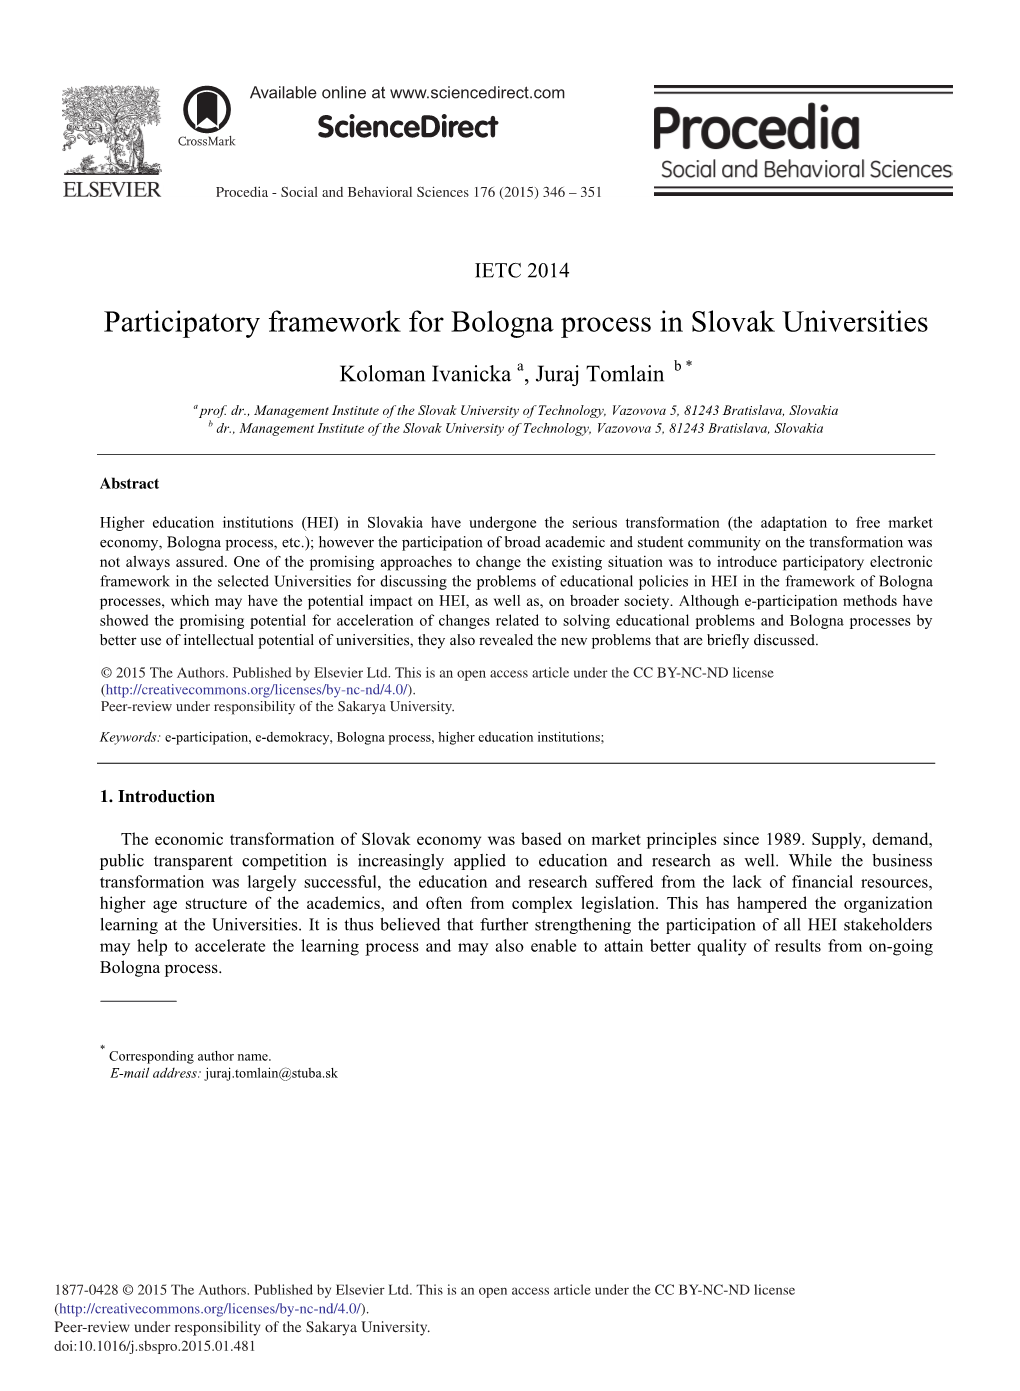 Participatory Framework for Bologna Process in Slovak Universities